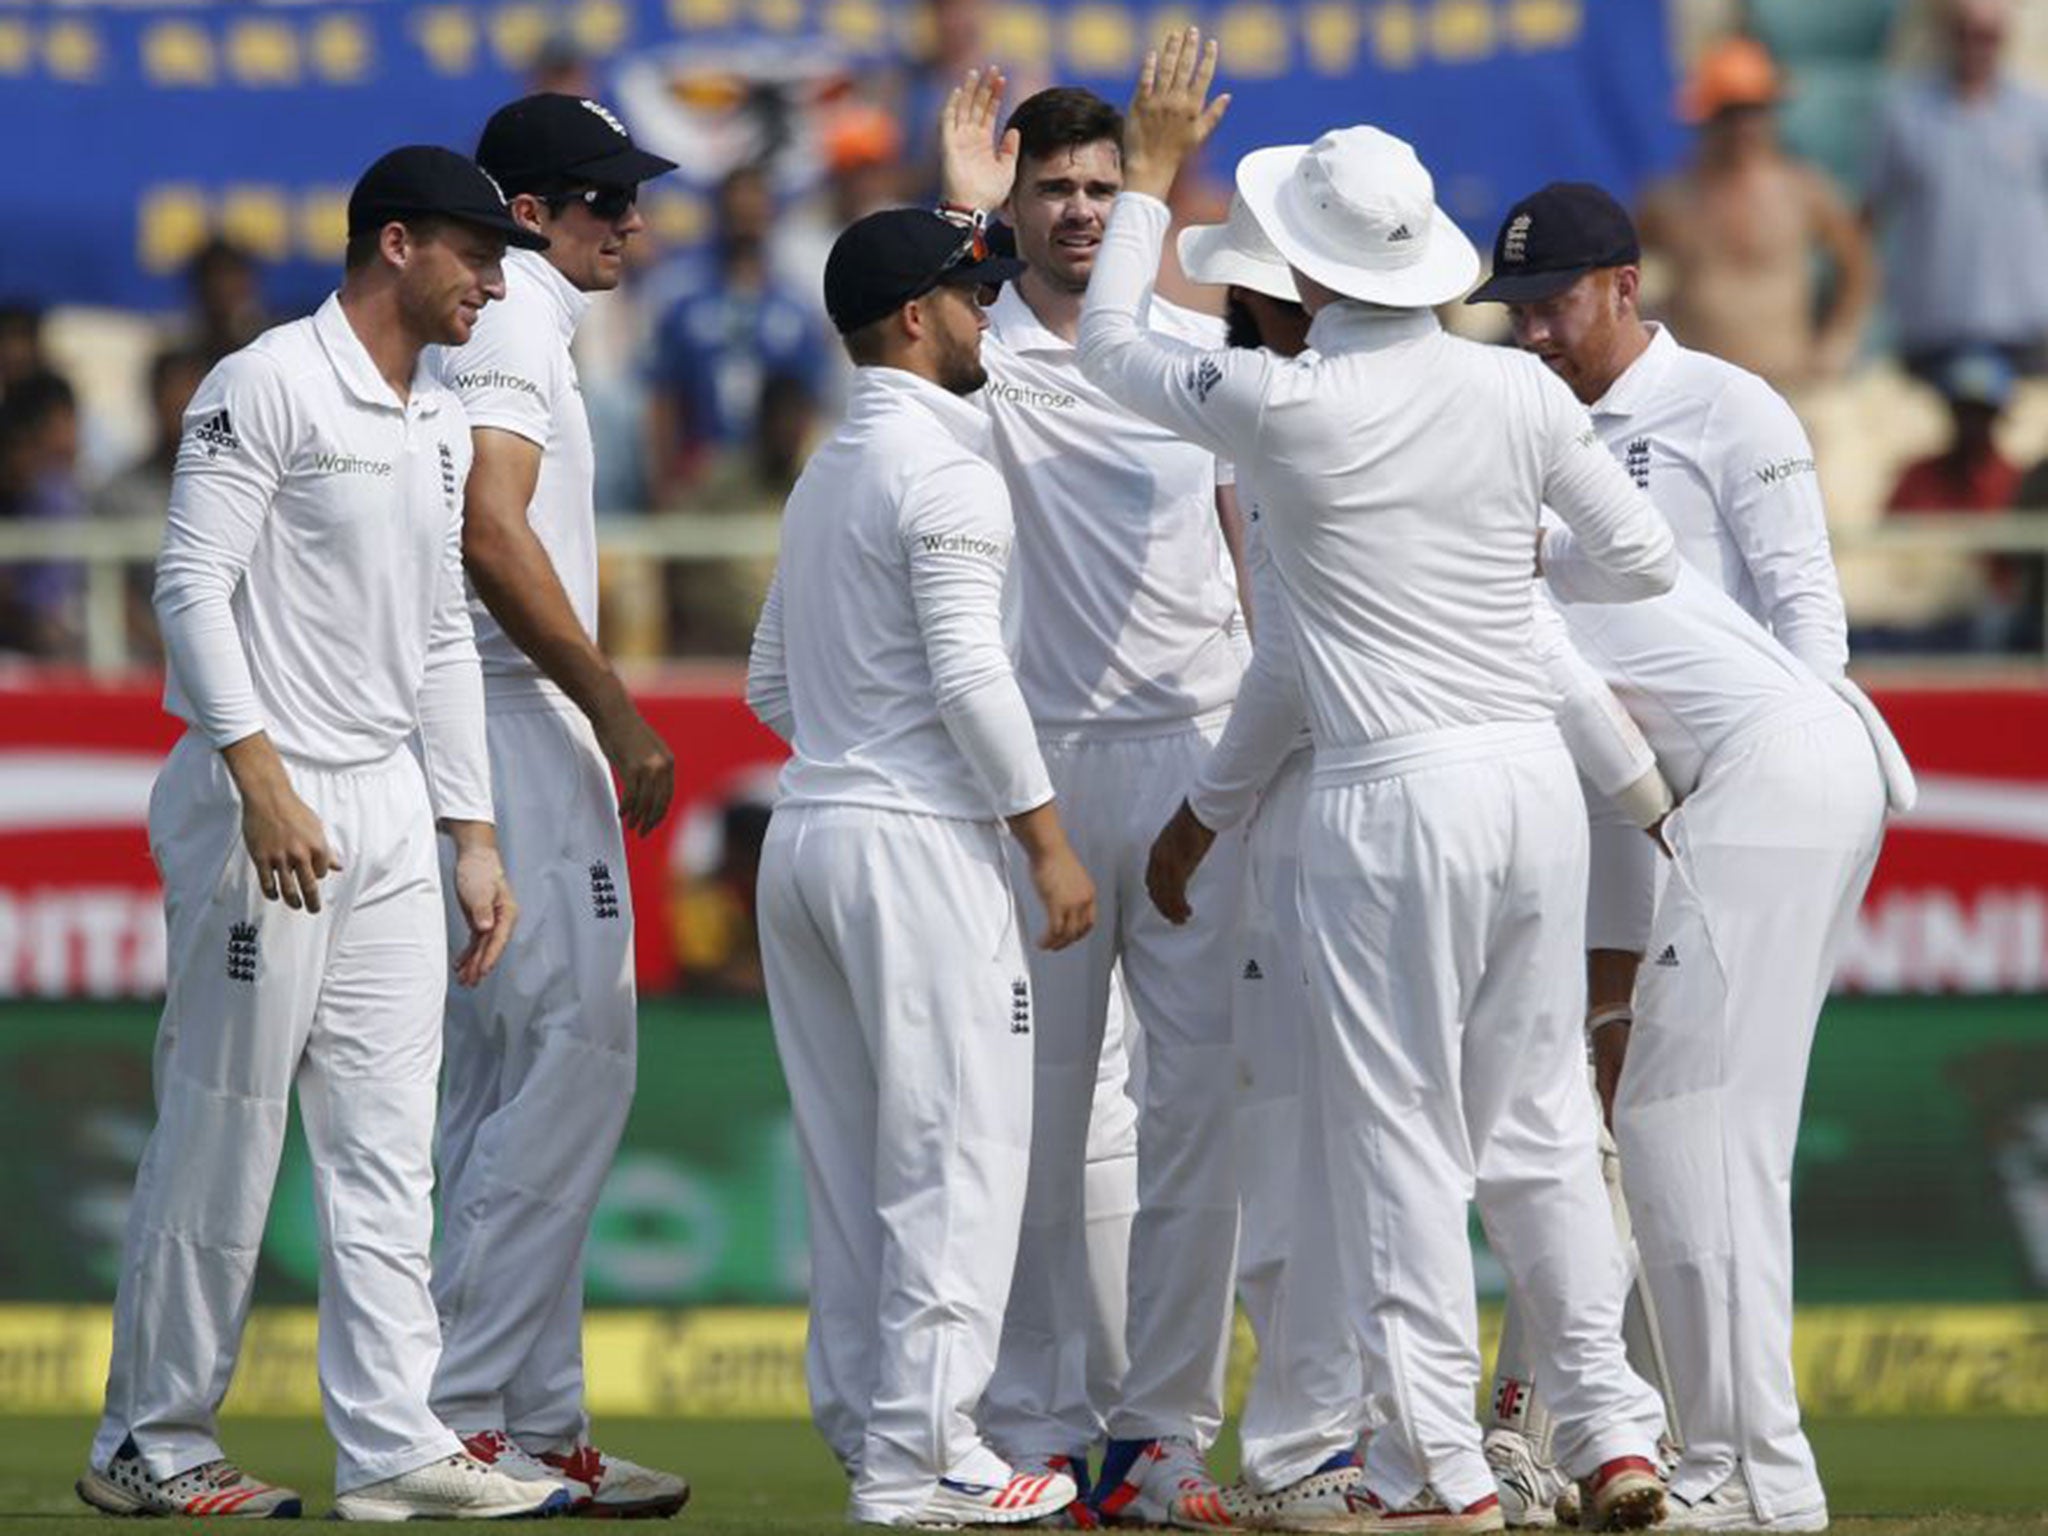 England celebrate after James Anderson takes a wicket during the opening session of the second Test against India